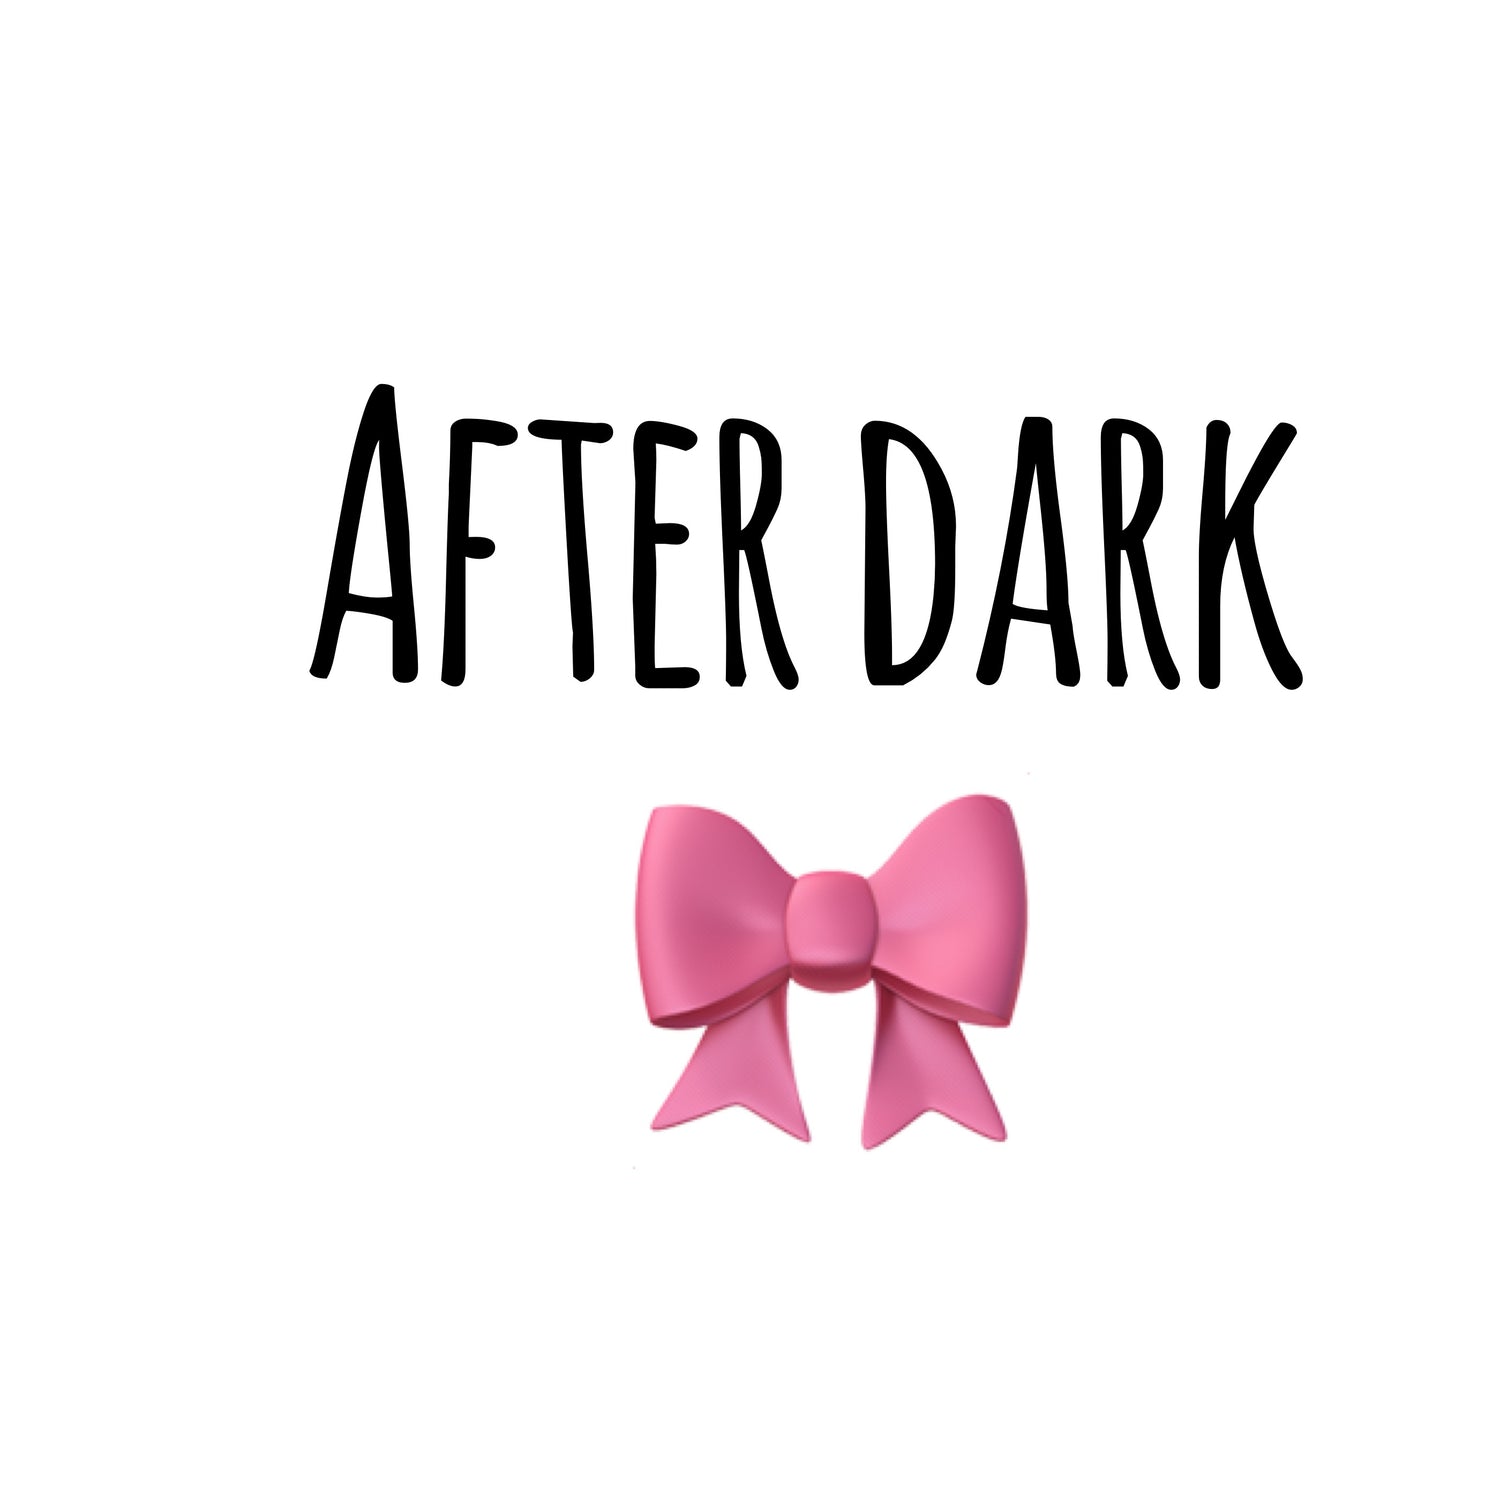 After dark collection